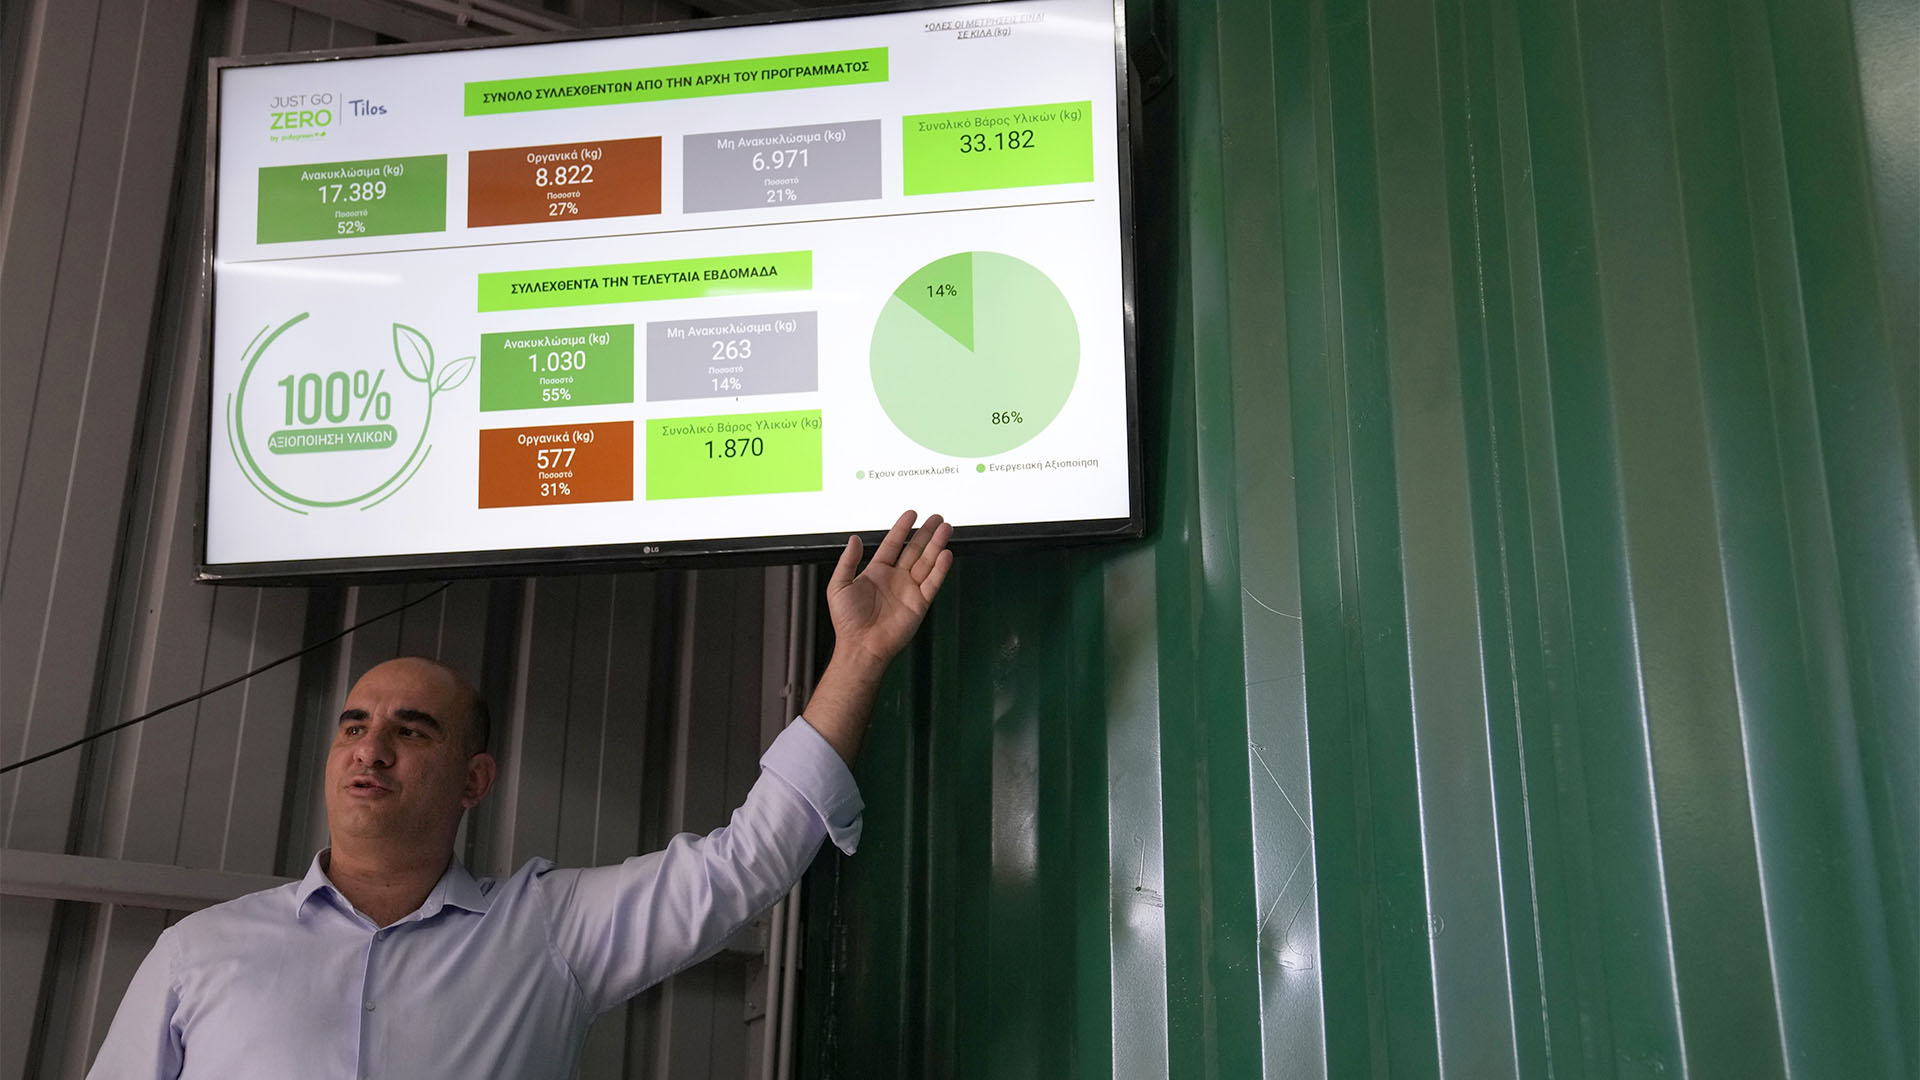 The founder and CEO of recycling company Polygreen, Athanasios Polychronopoulos, shows a screen displaying data at a recycling plant built on a former landfill (AP Photo/Thanassis Stavrakis)